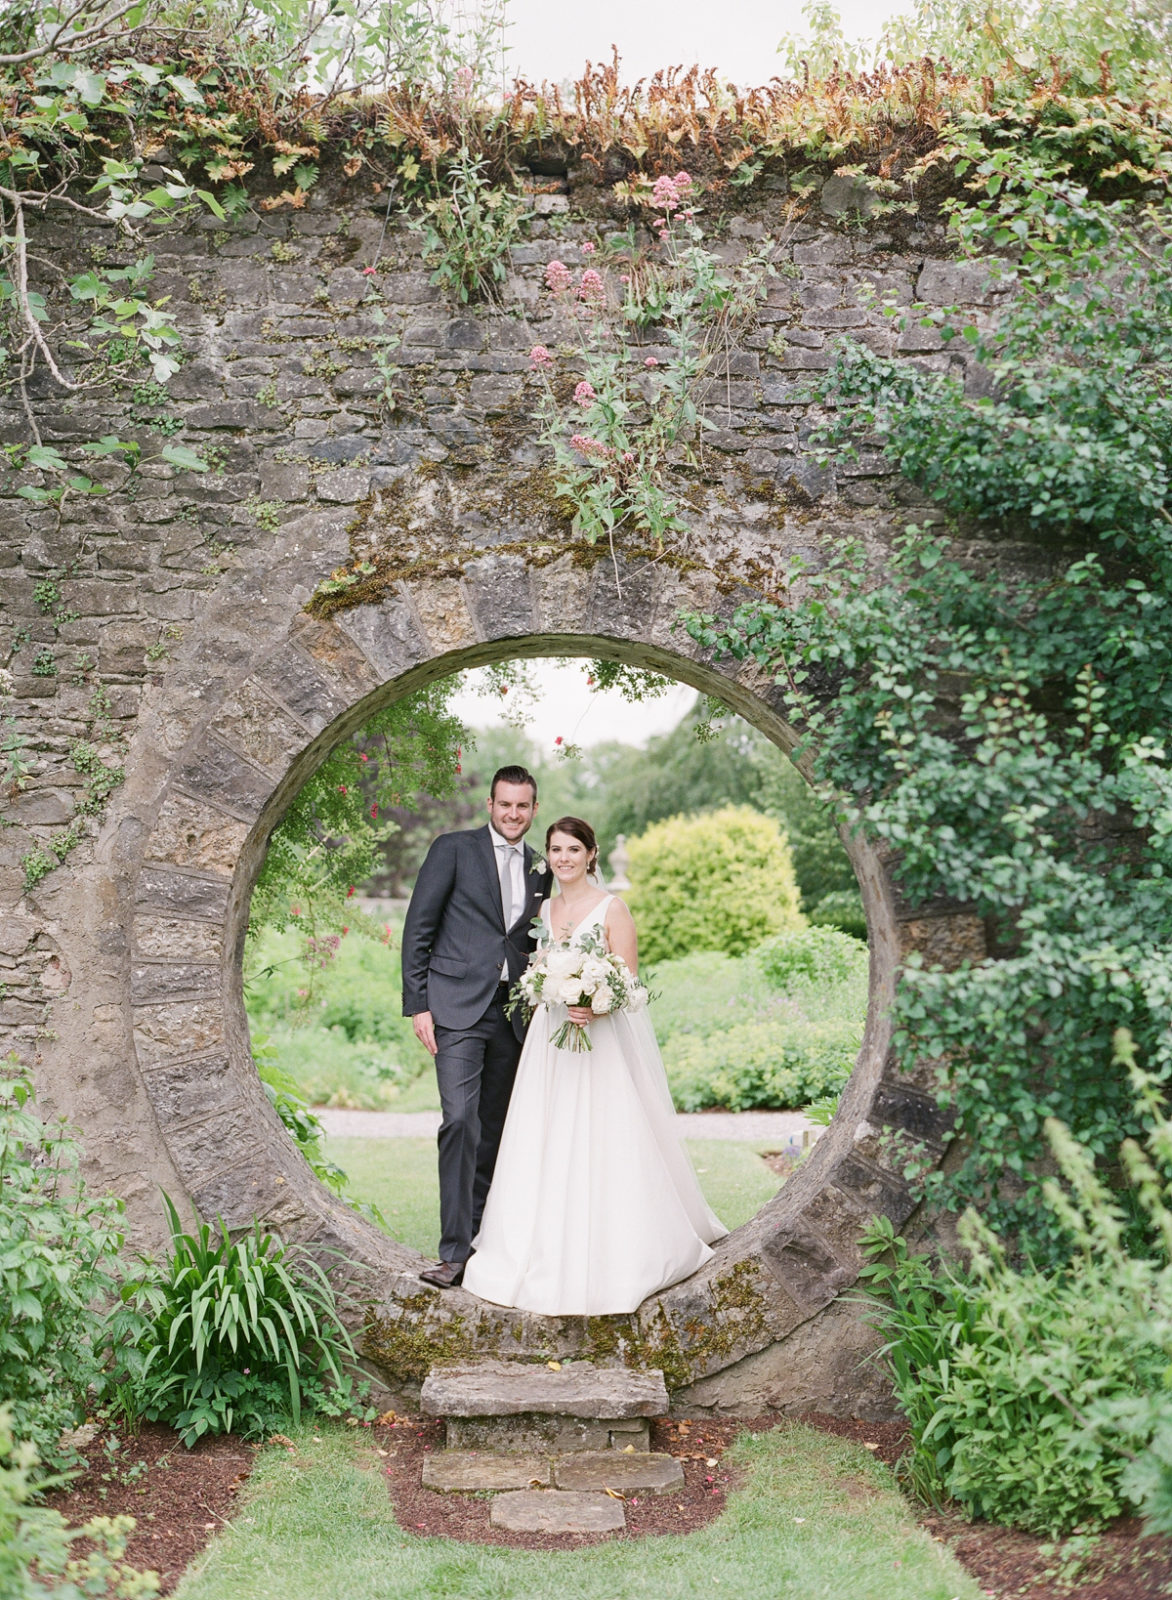 Ireland Film Photographer | Molly Carr Photography | Bride in White Jenny Yoo Wedding Dress and Groom in Grey Suit in Mount Juliet Estate Moon Garden